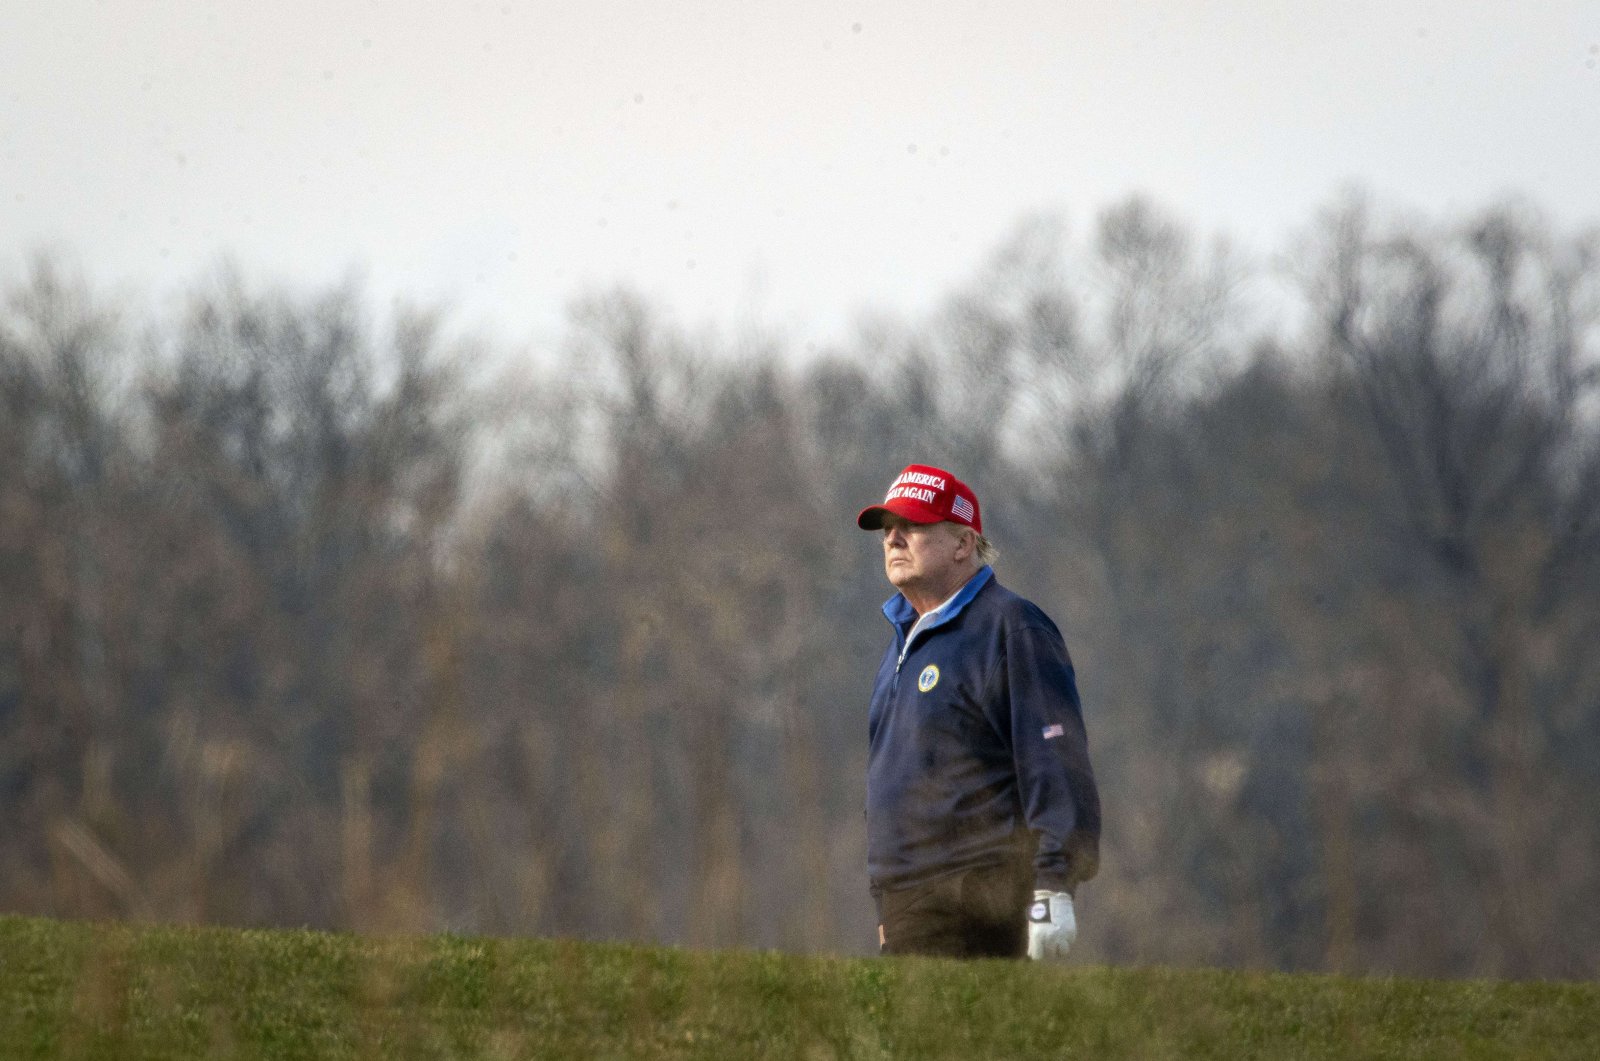 U.S. President Donald Trump golfs at Trump National Golf Club on December 13, 2020 in Sterling, Virginia. (AFP Photo)